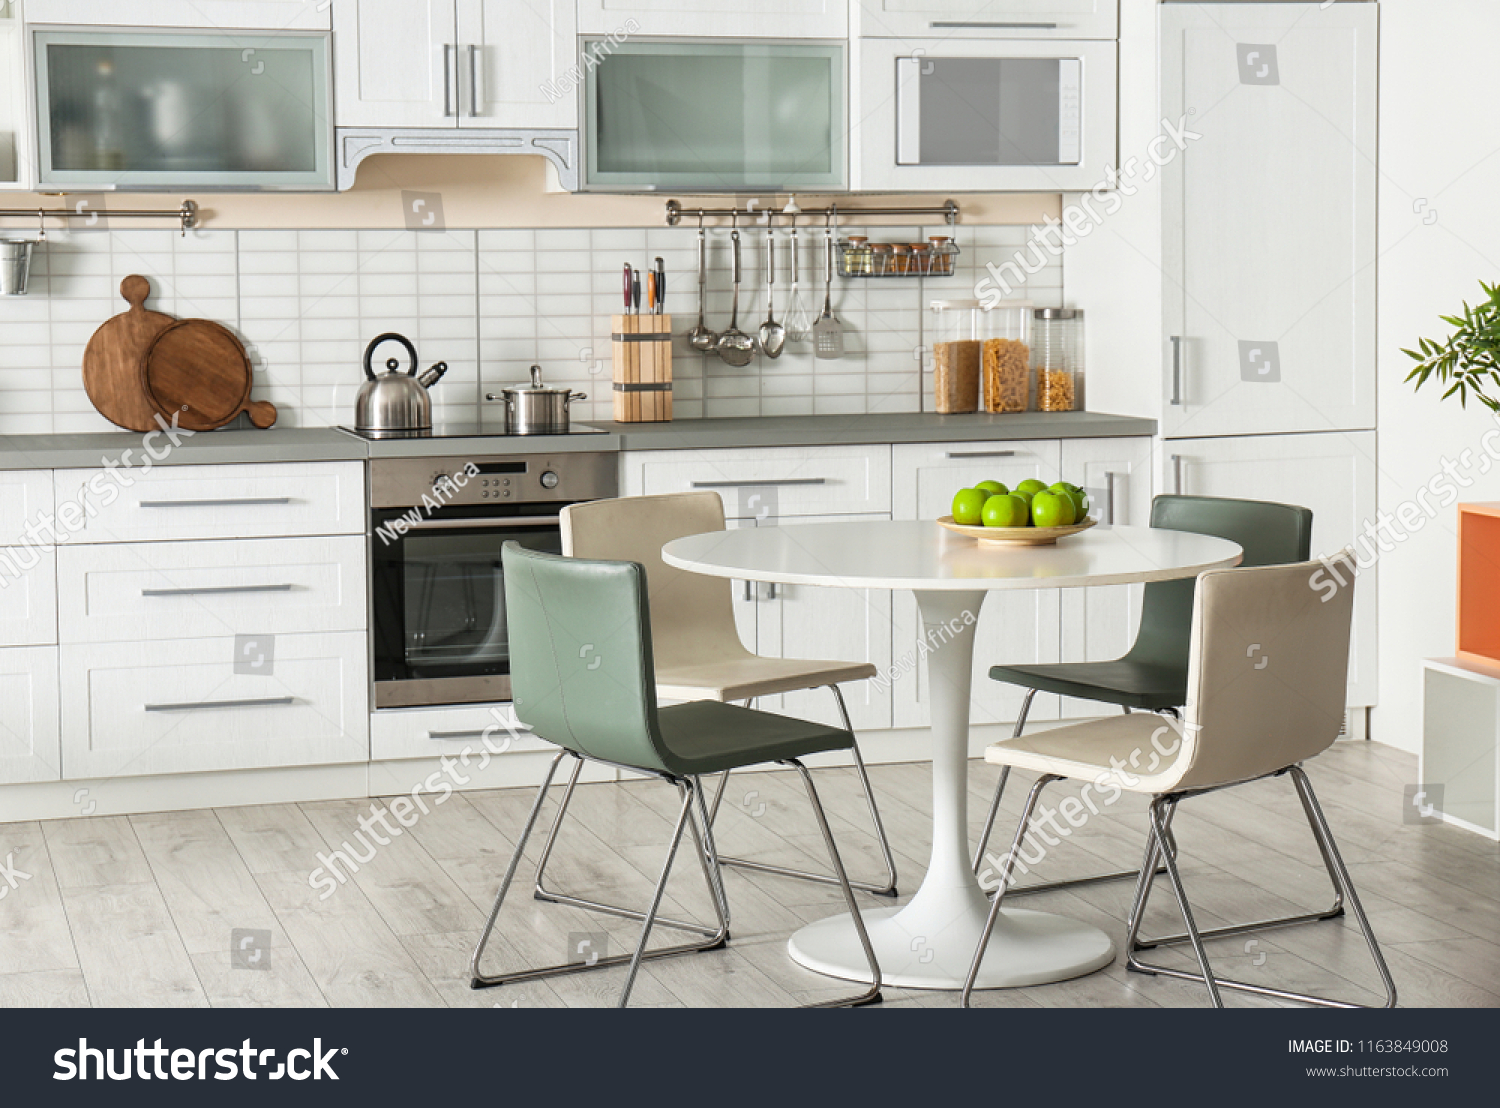 Stock Photo Stylish Kitchen Interior With Dining Table And Chairs 1163849008 